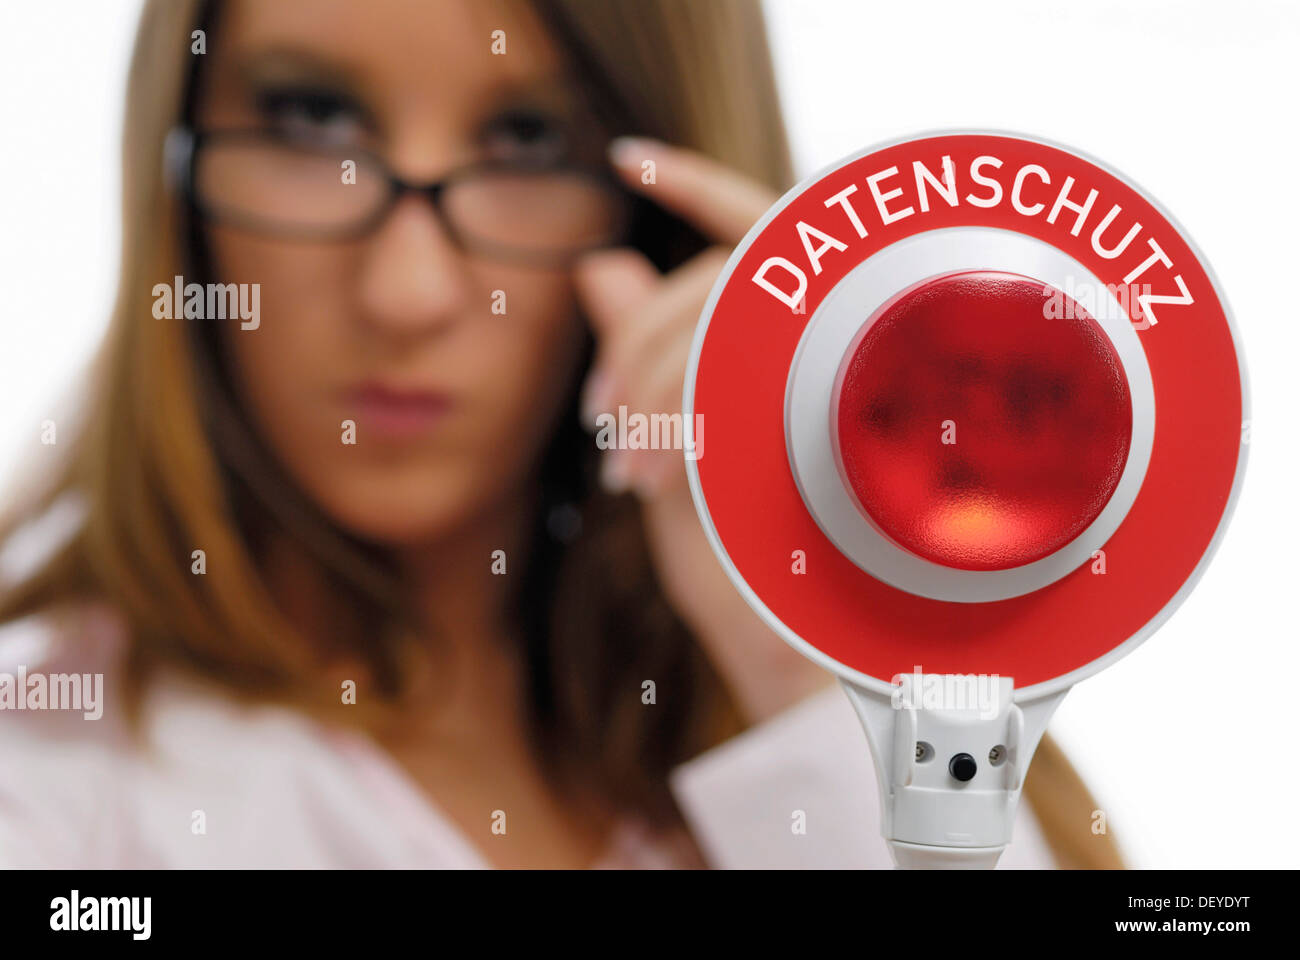 Woman holding a red police signalling disk, Datenschutz, data protection, written on it Stock Photo